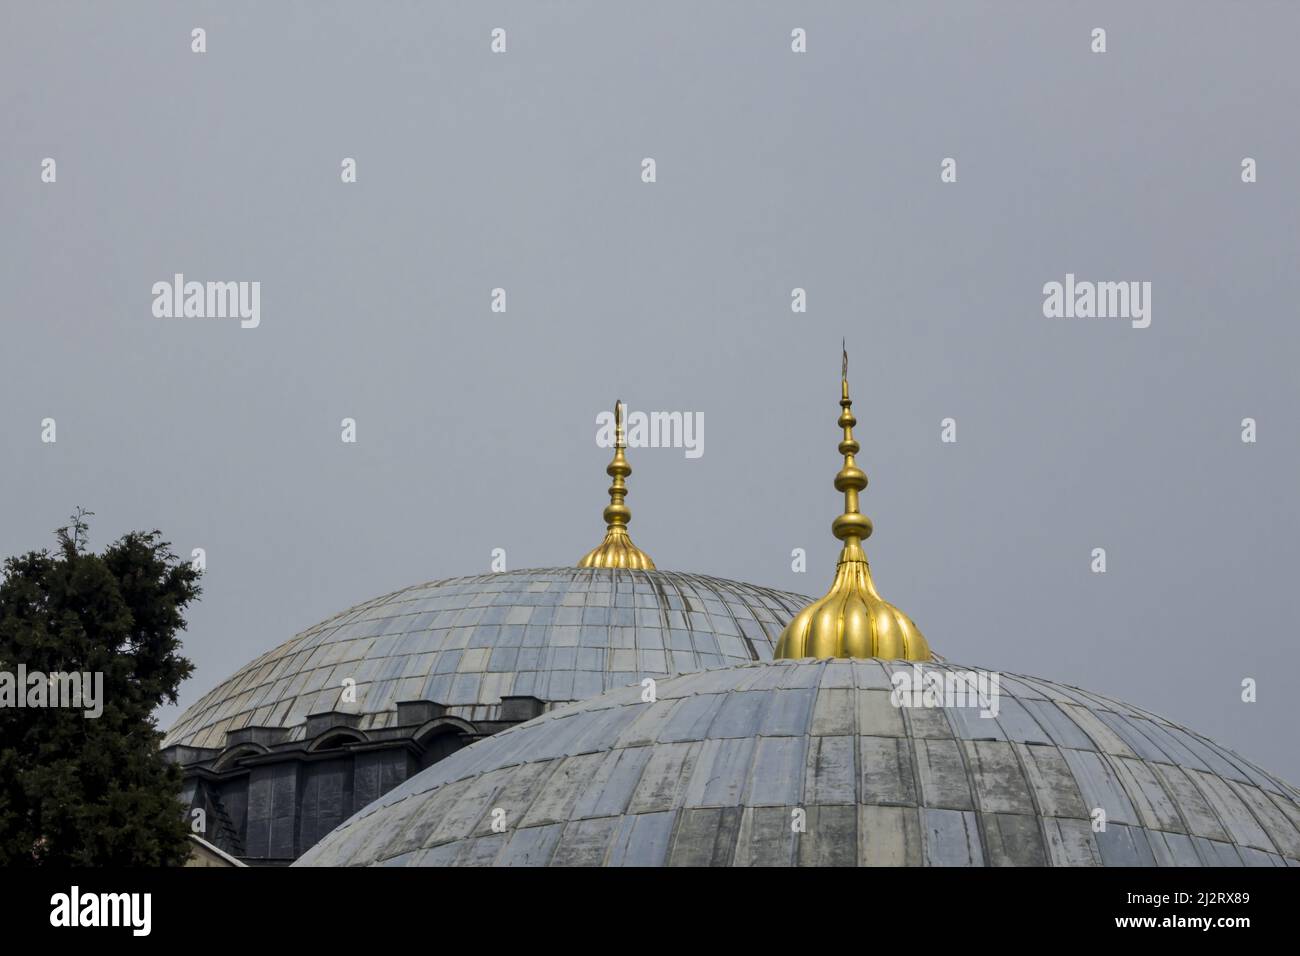 Selective focus of two domes of the mosque in the gray sky with copy space Stock Photo